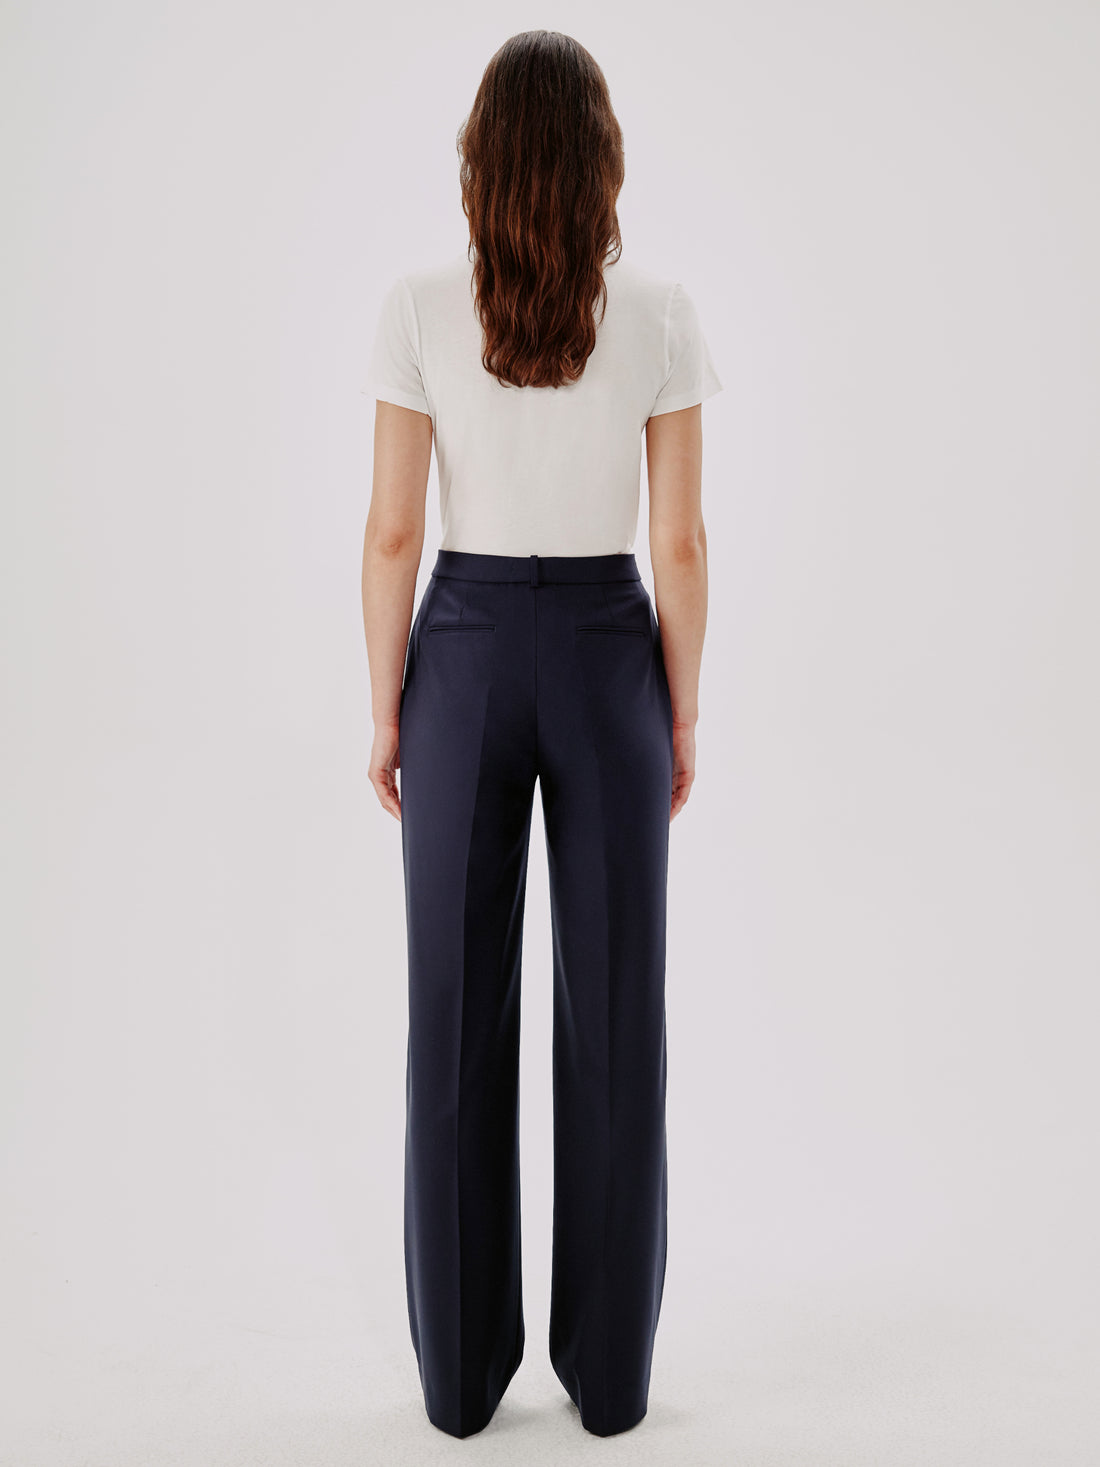 Navy blue high waist pants for women, Blue wide leg pants for women, Women's  office pants high rise, Womens palazzo pants blue -  Portugal